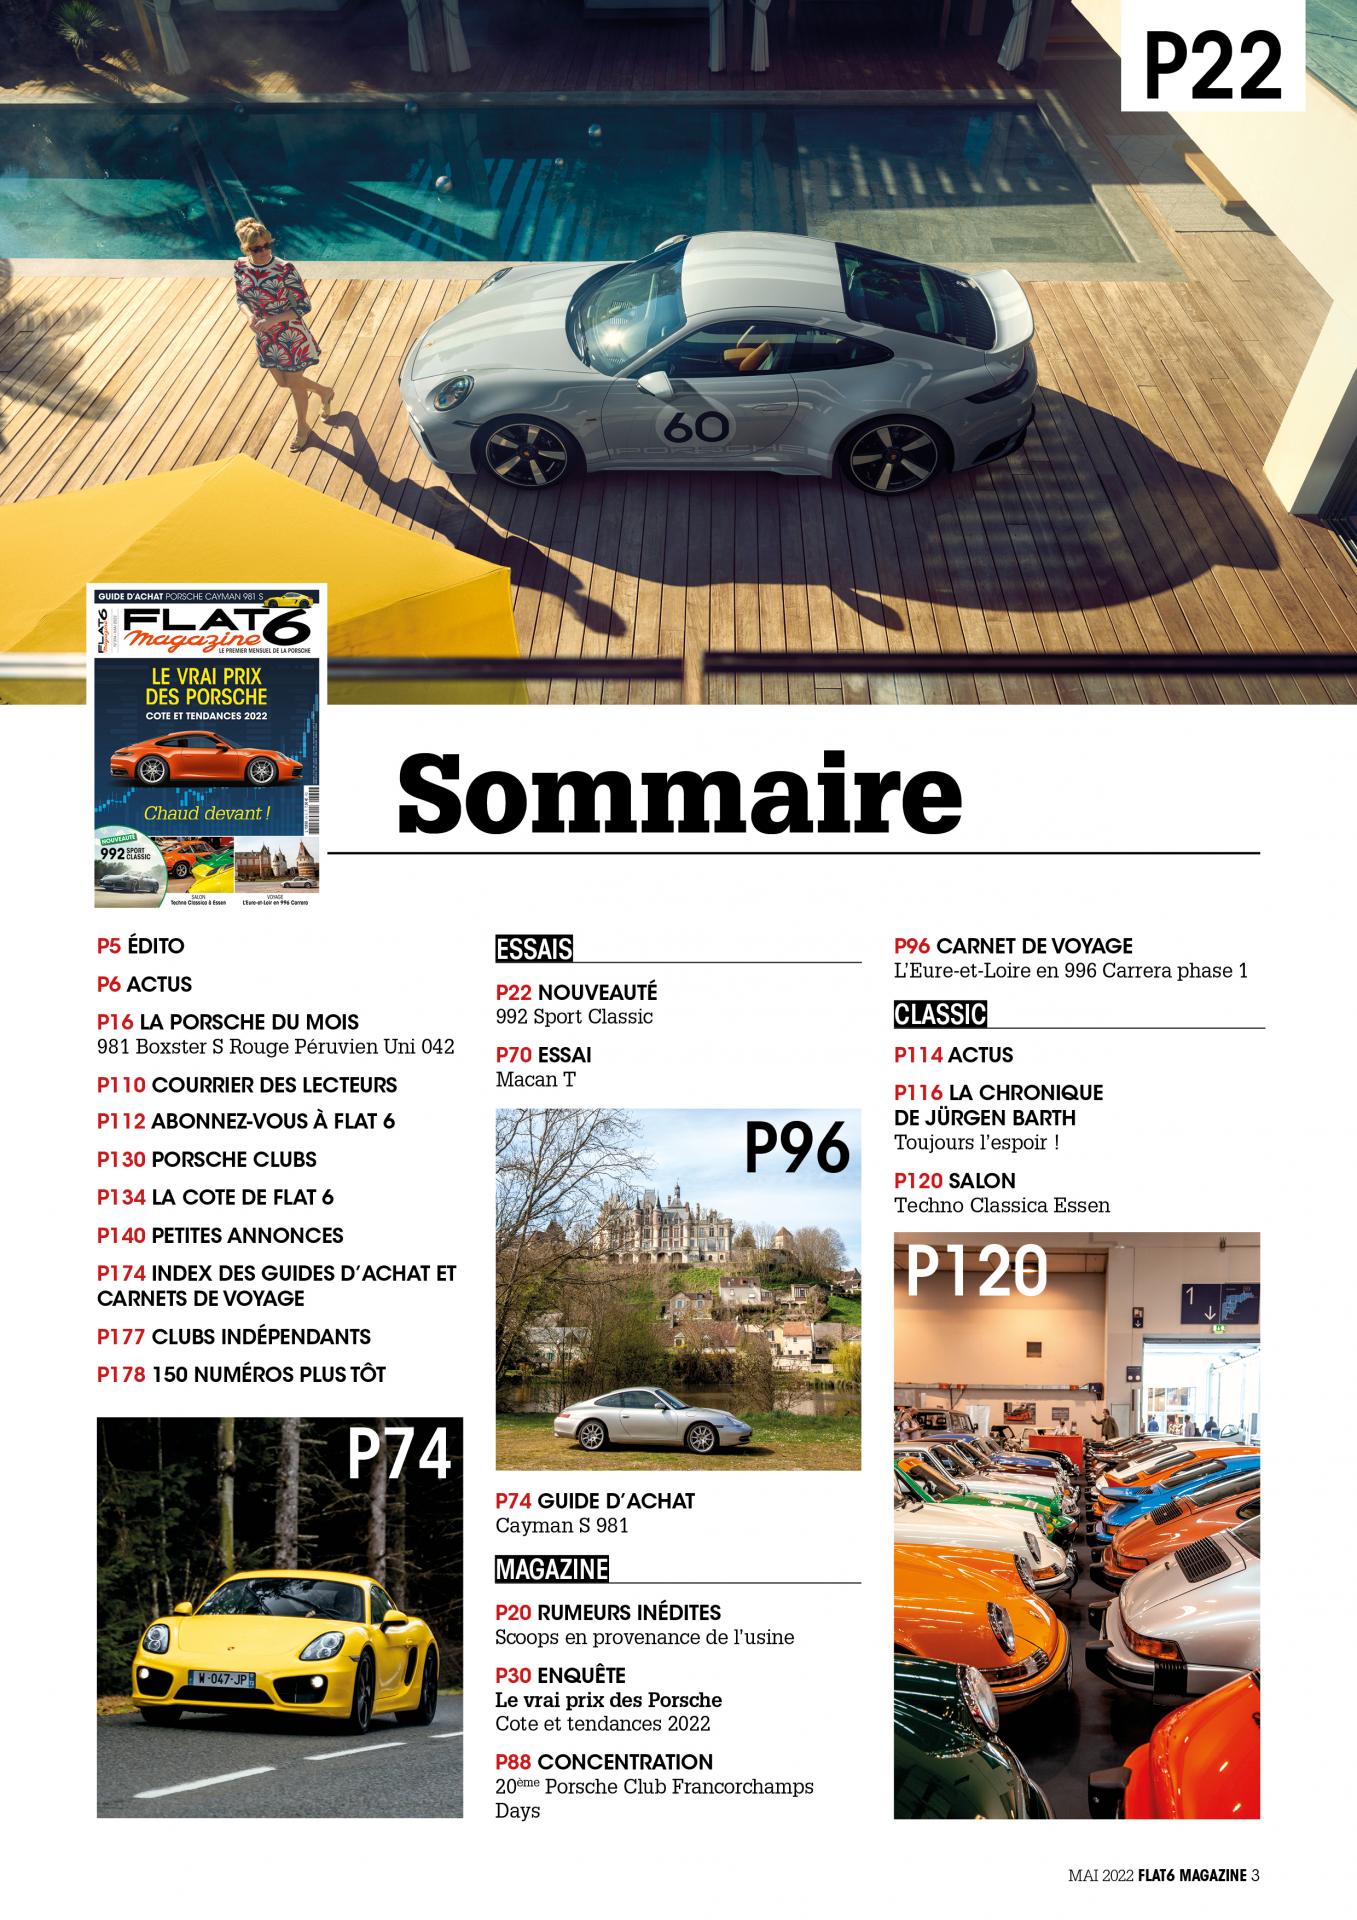 Sommaire374